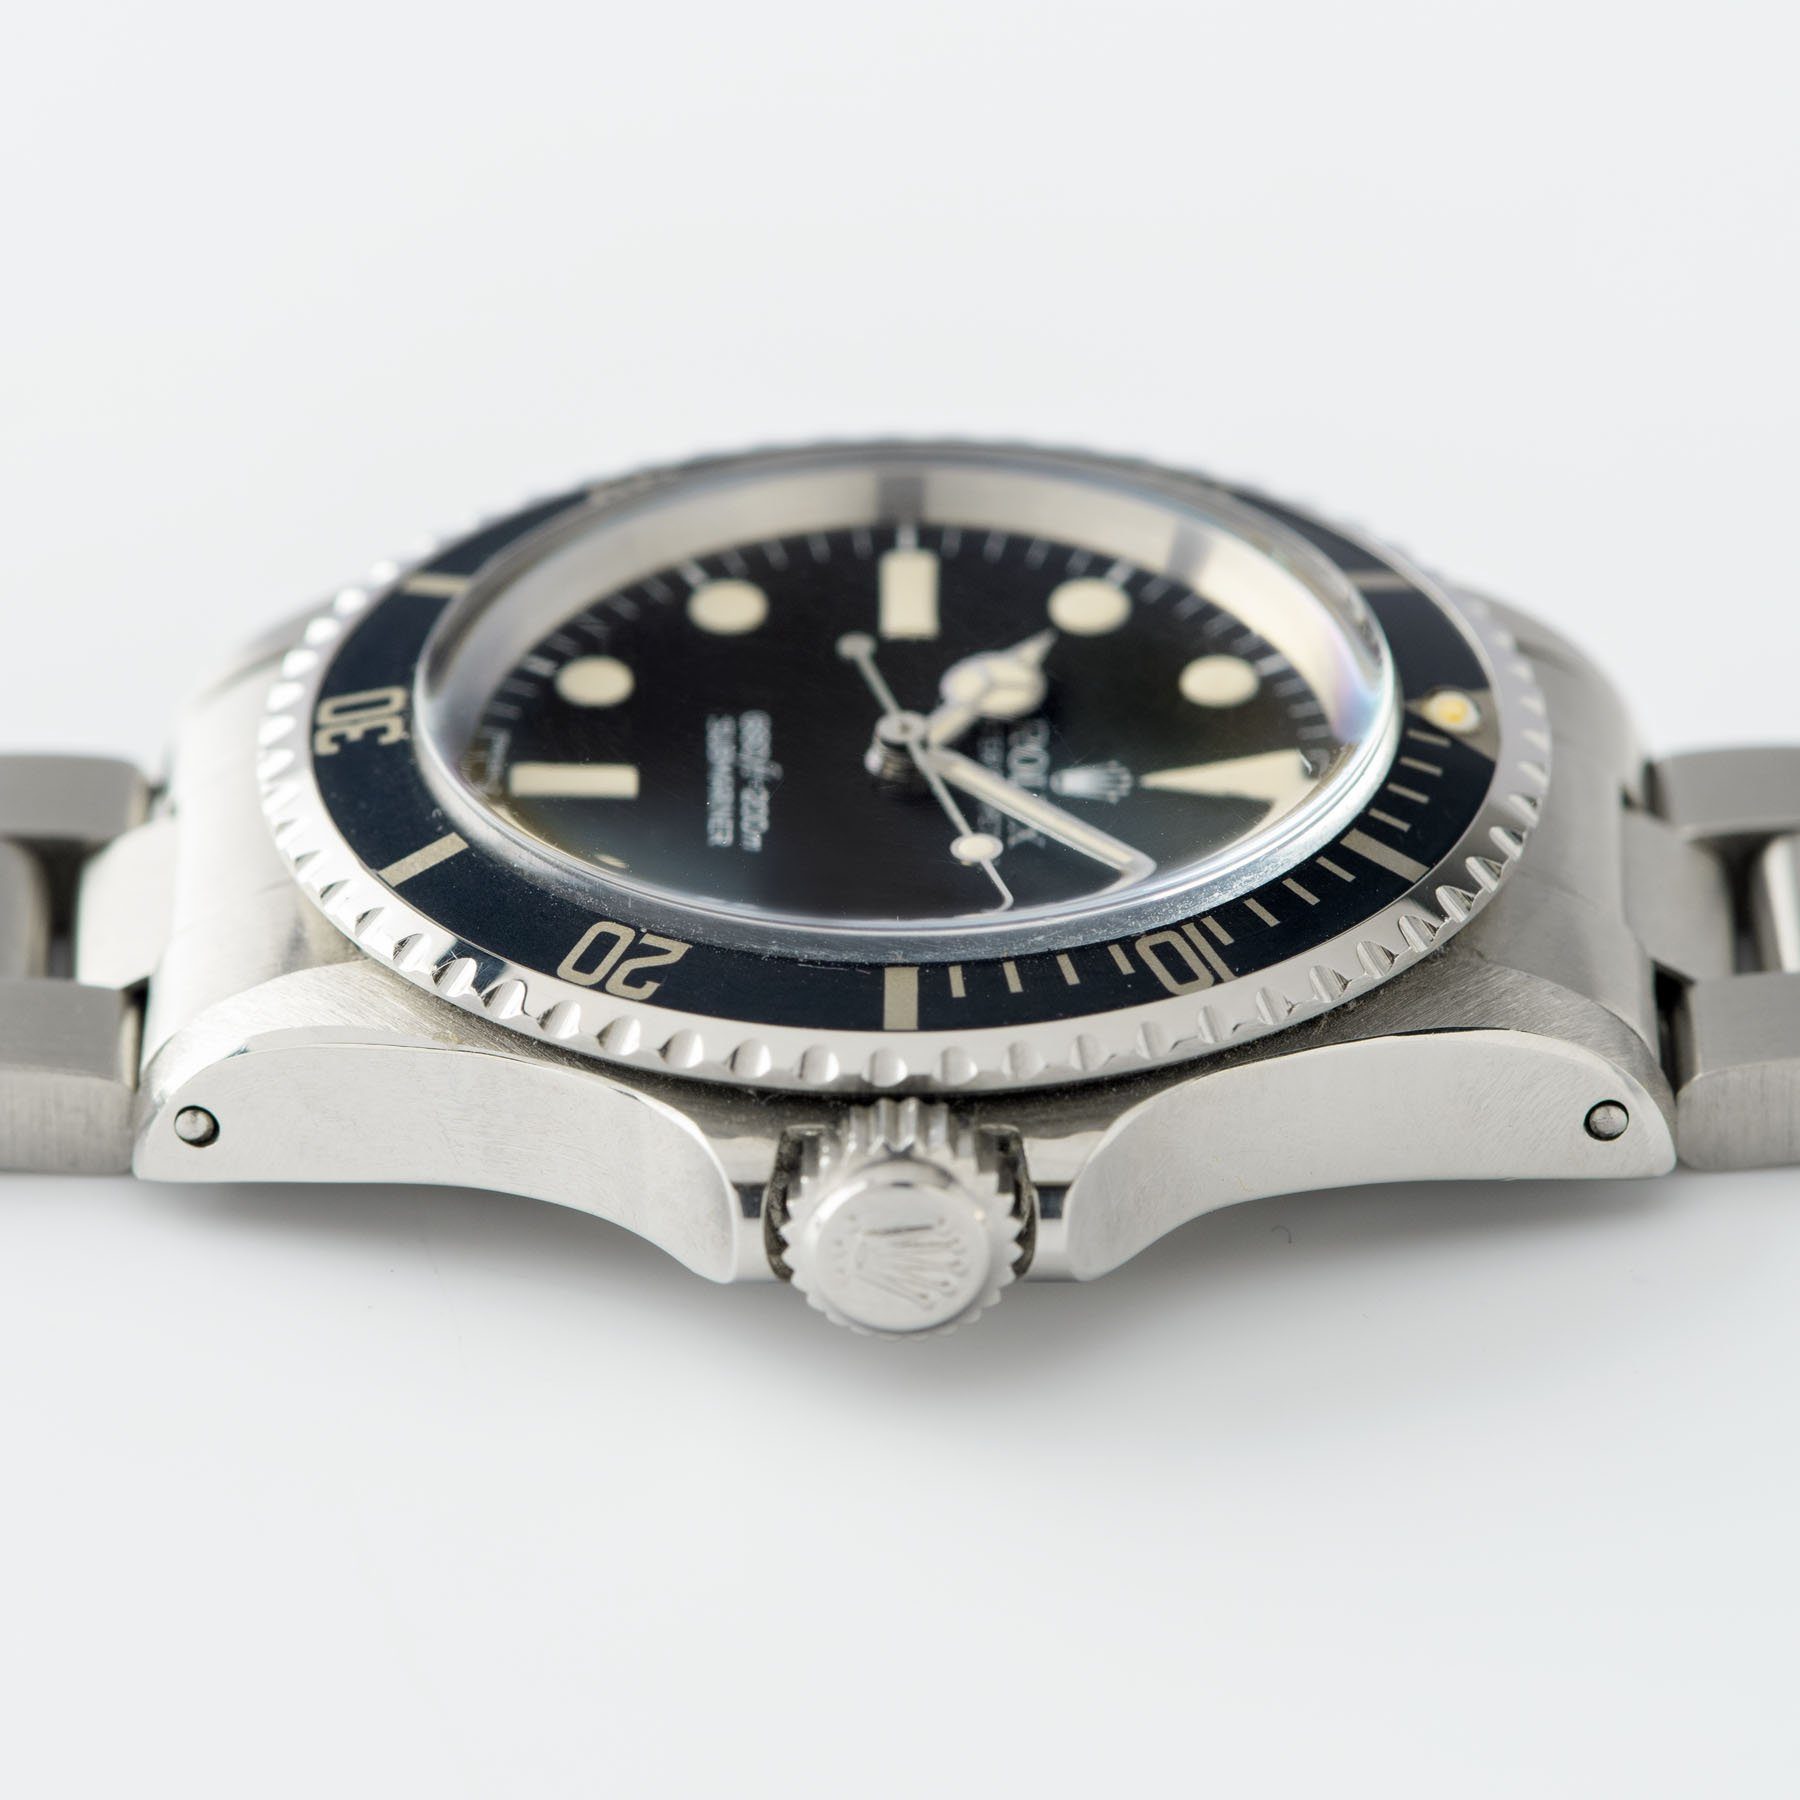 Rolex Submariner Mk 1 Maxi 5513 Box and Papers